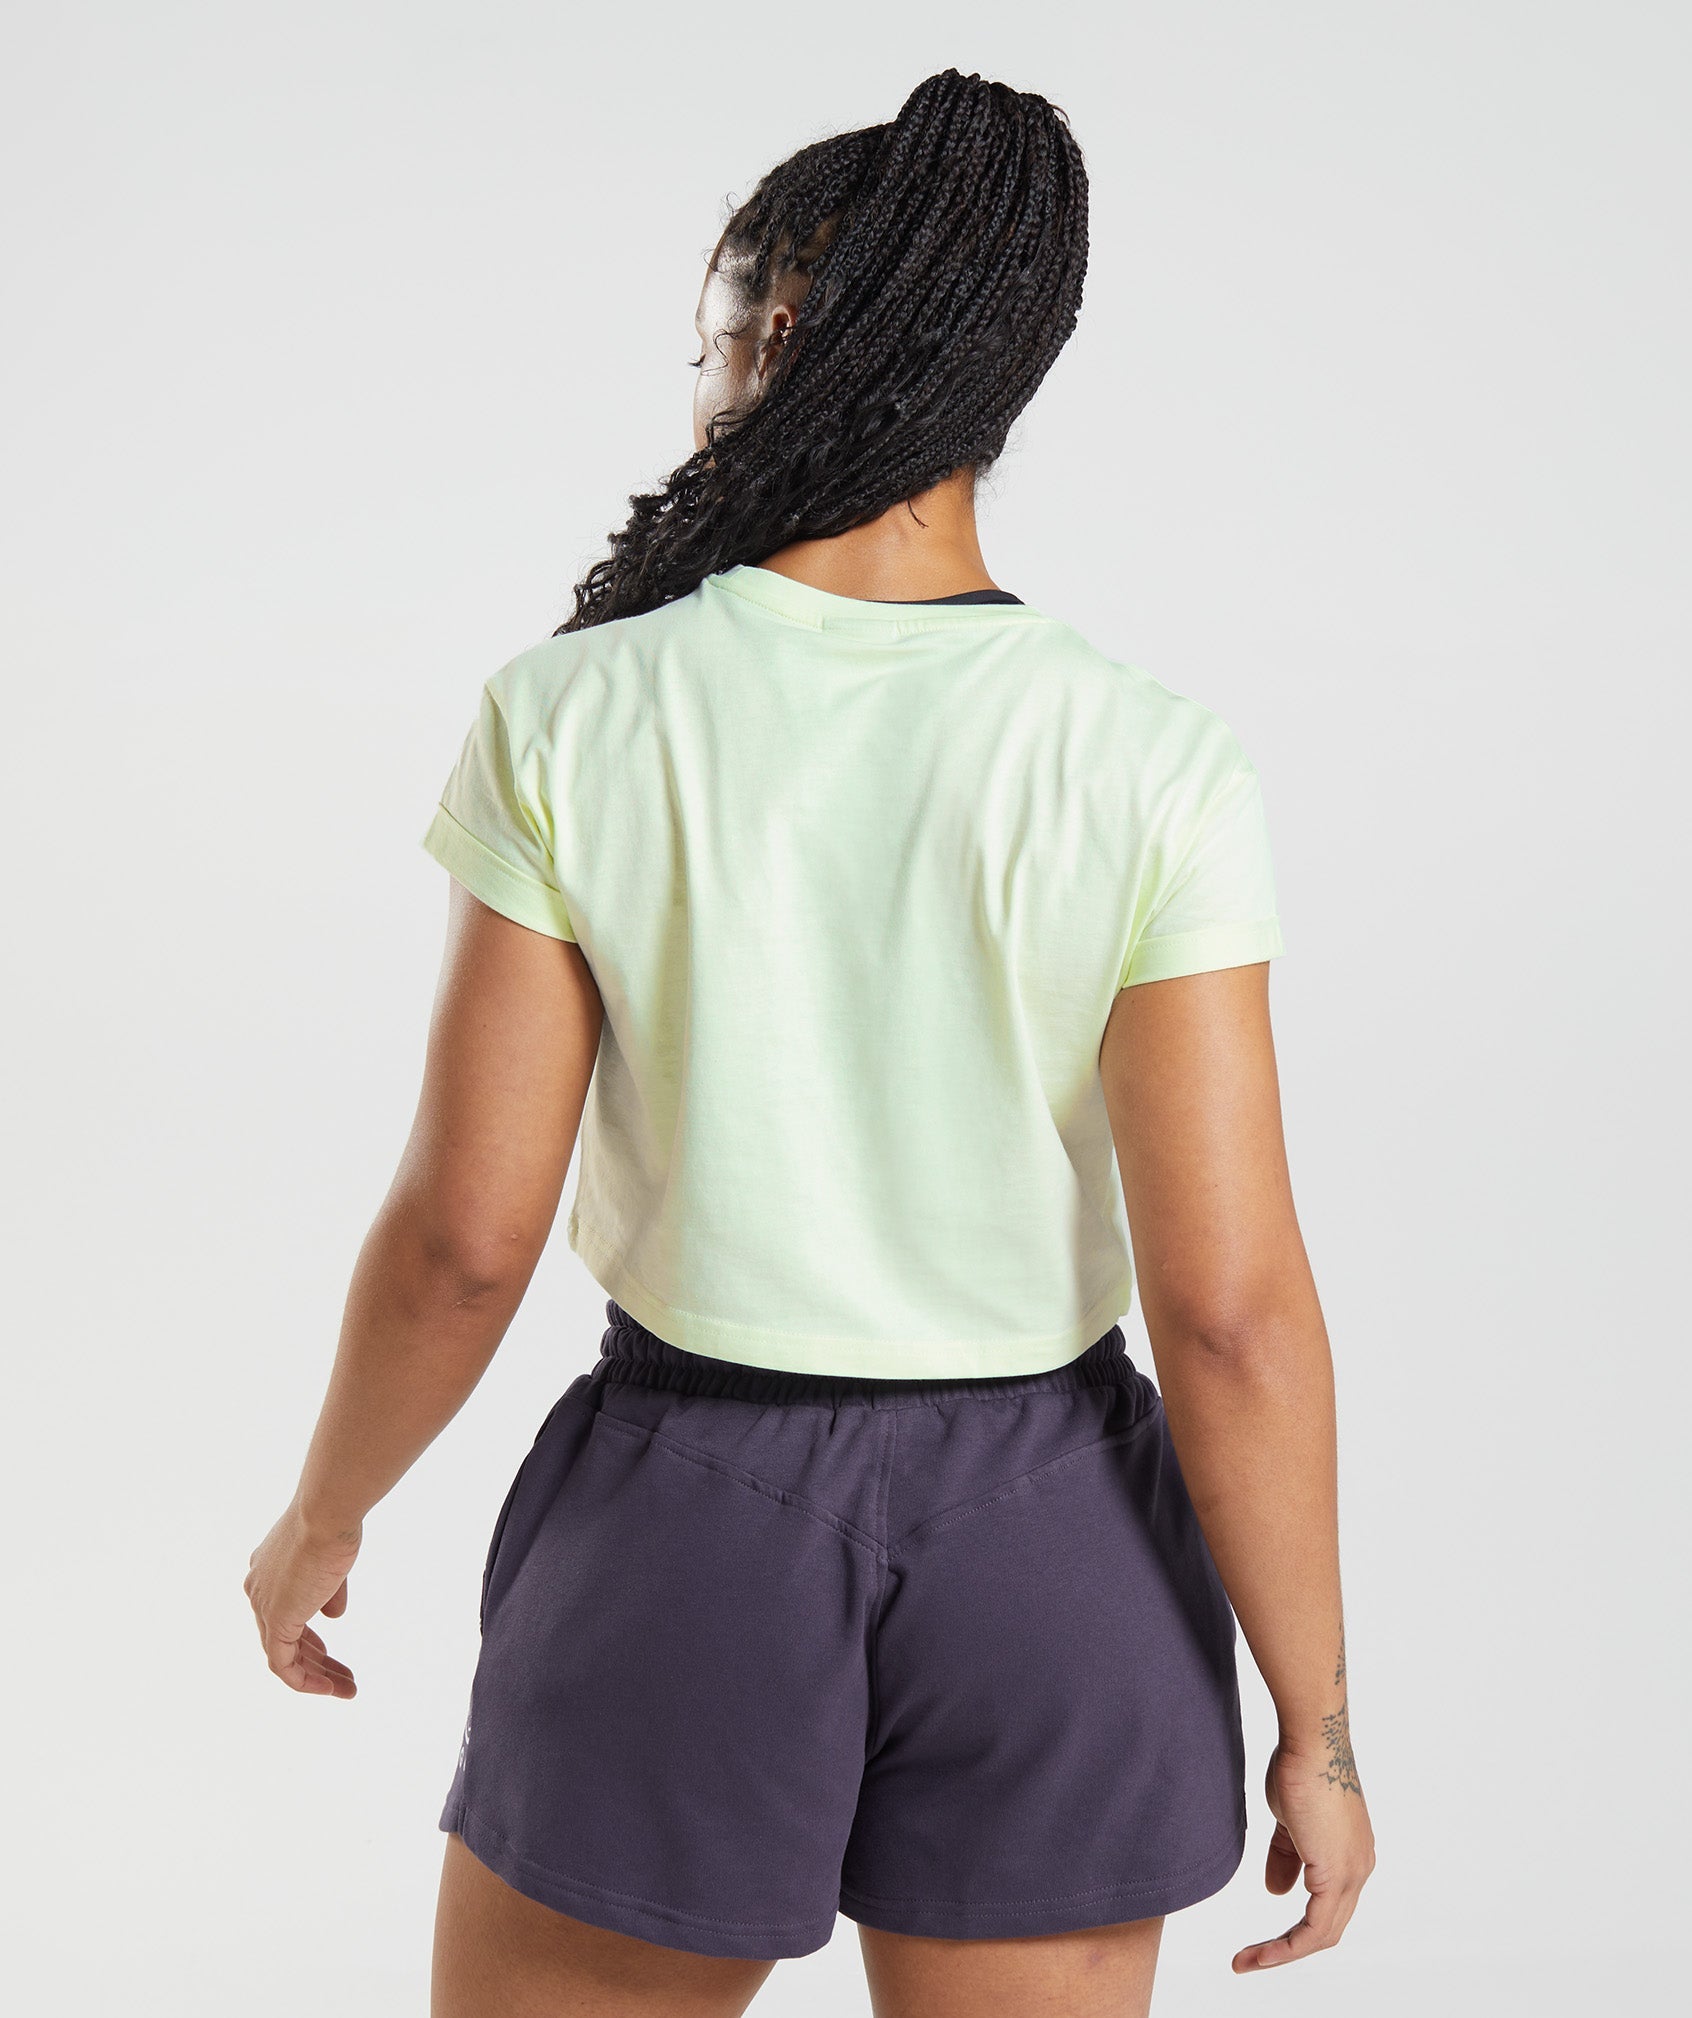 Legacy Crop Top in Cucumber Green - view 2